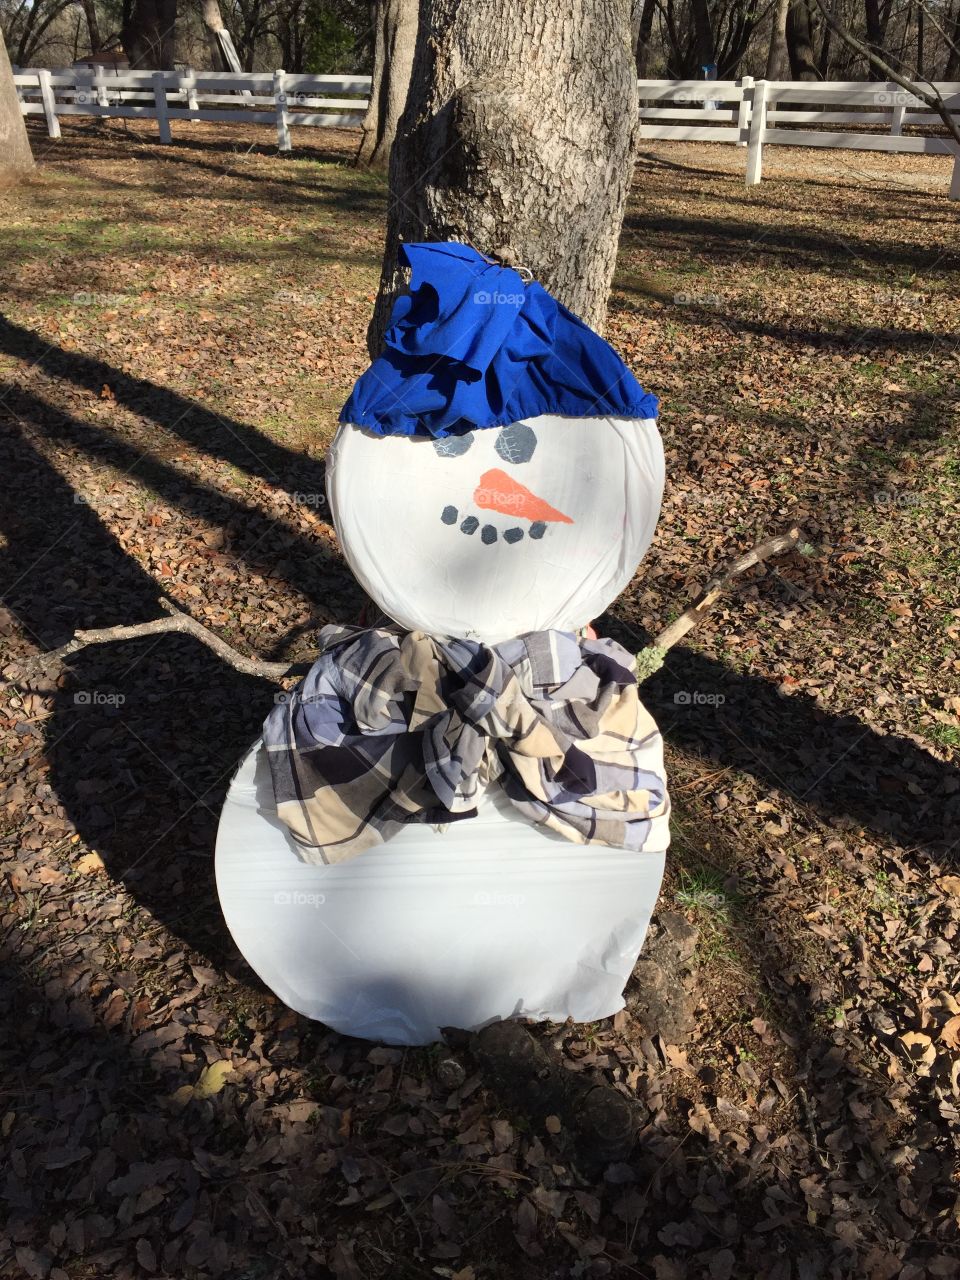 Chilling in the leaves - wishing for some snow!
Let's see.... 
white plastic trash bags✔️
 old colourful clothing ✔️
Black,white & orange paint✔️
Plastic lids from store bought pizzas or fruit trays✔️
Imagination✔️



